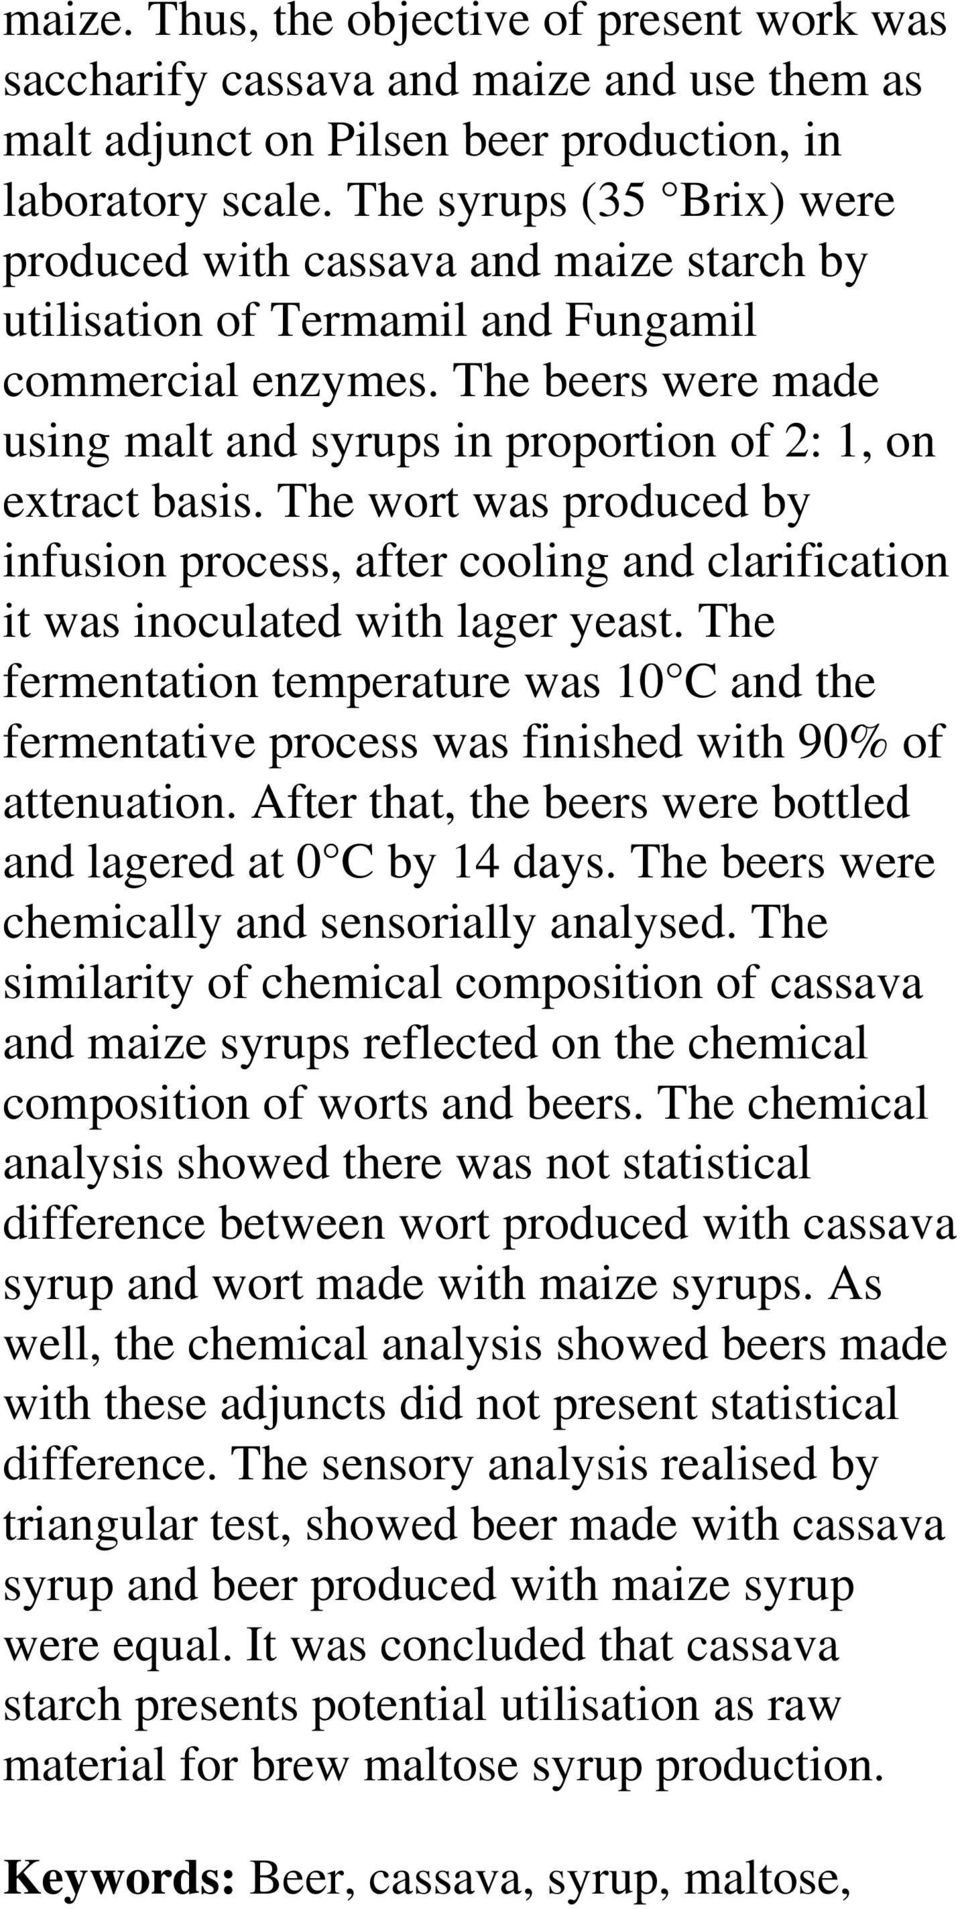 The beers were made using malt and syrups in proportion of 2: 1, on extract basis. The wort was produced by infusion process, after cooling and clarification it was inoculated with lager yeast.